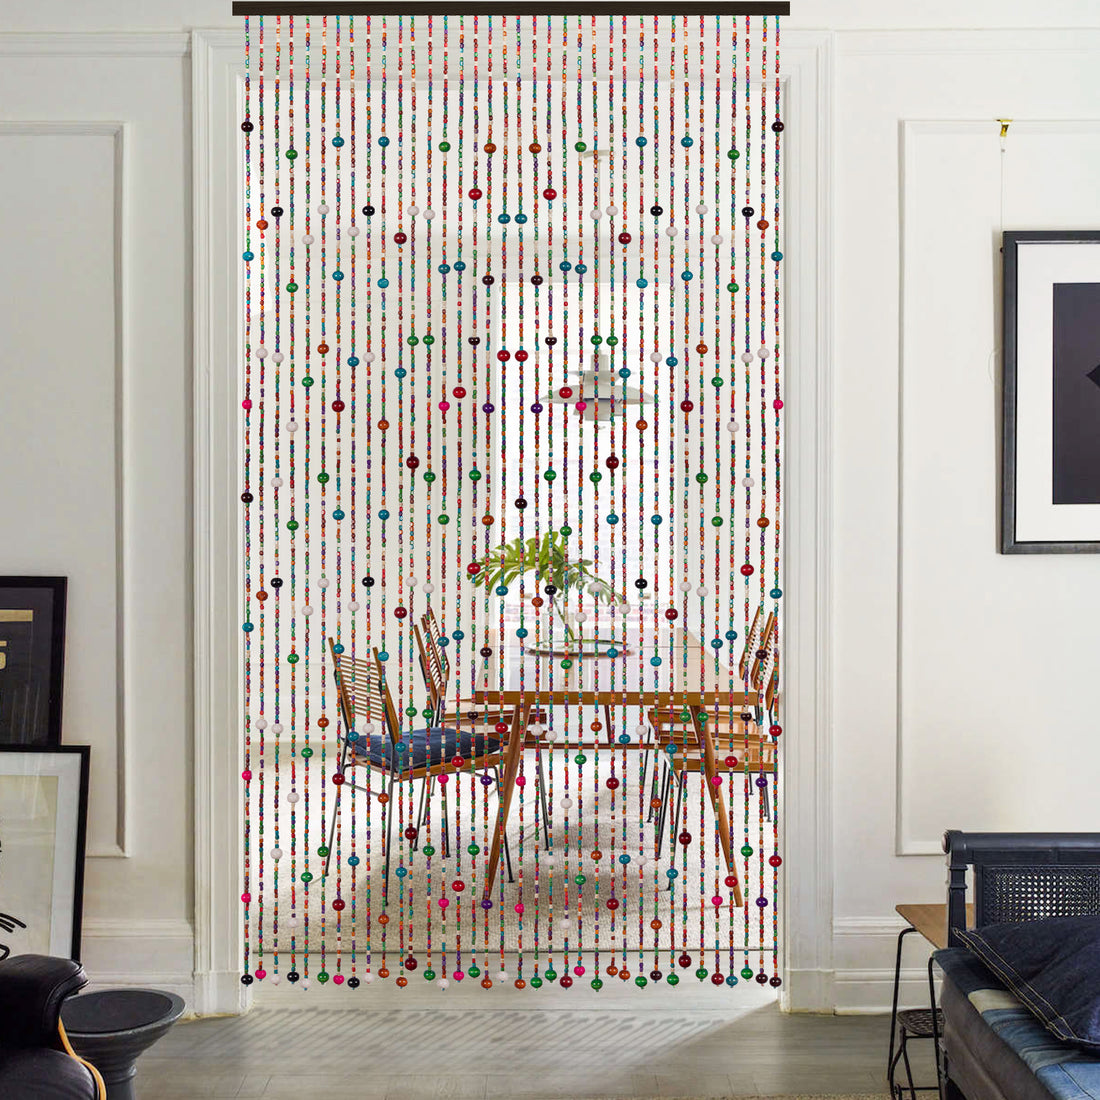 Unique Home Decorcolorful Hippie Beaded Curtain for a Window made